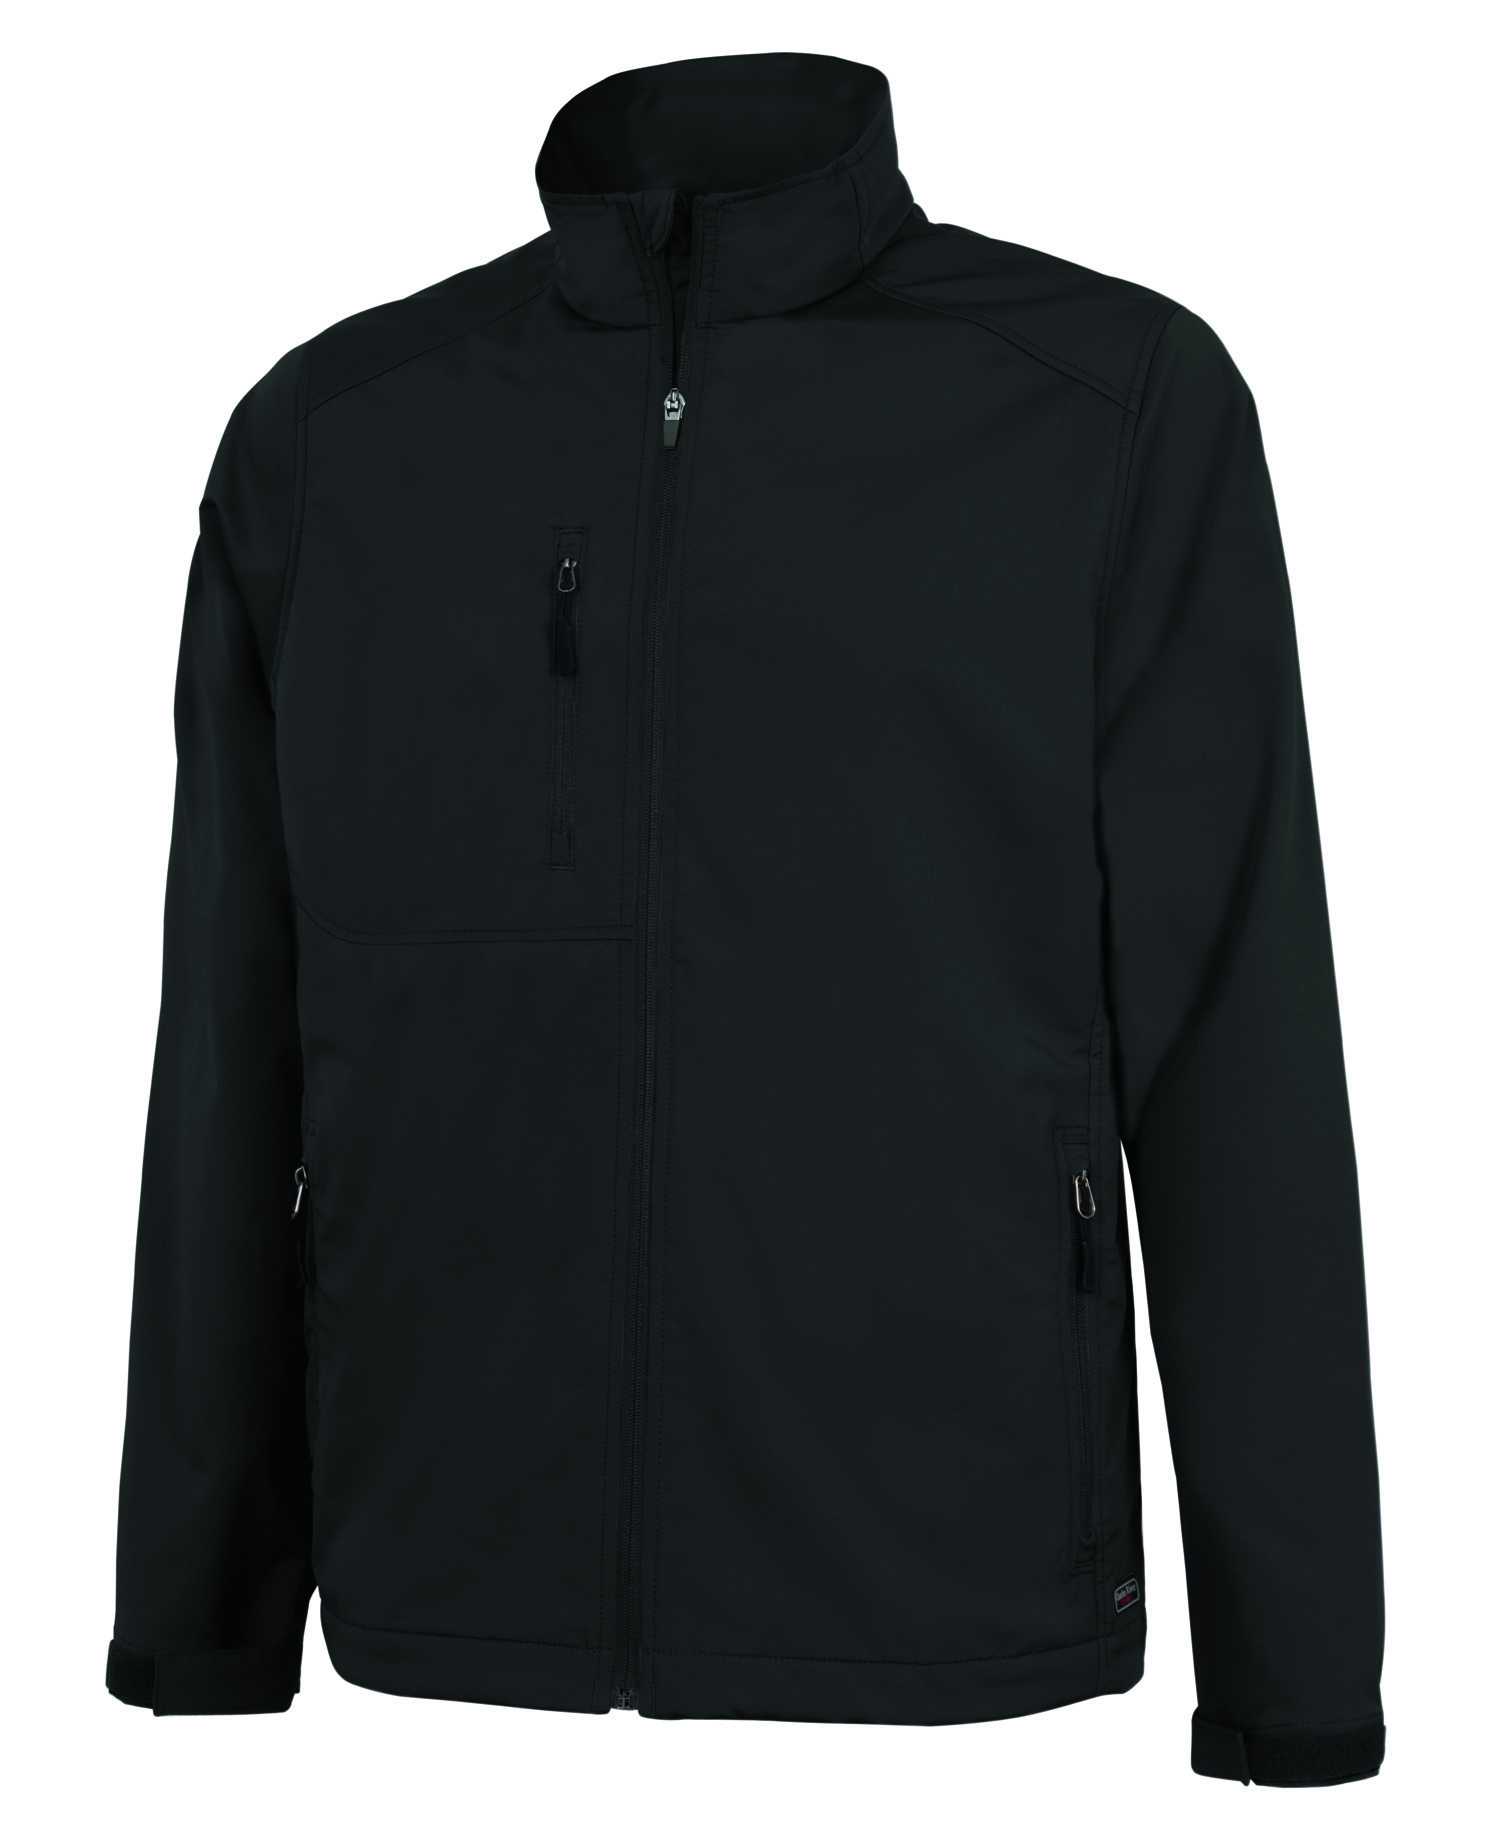 Men’s Axis Soft Shell Jacket – Shirts Unlimited